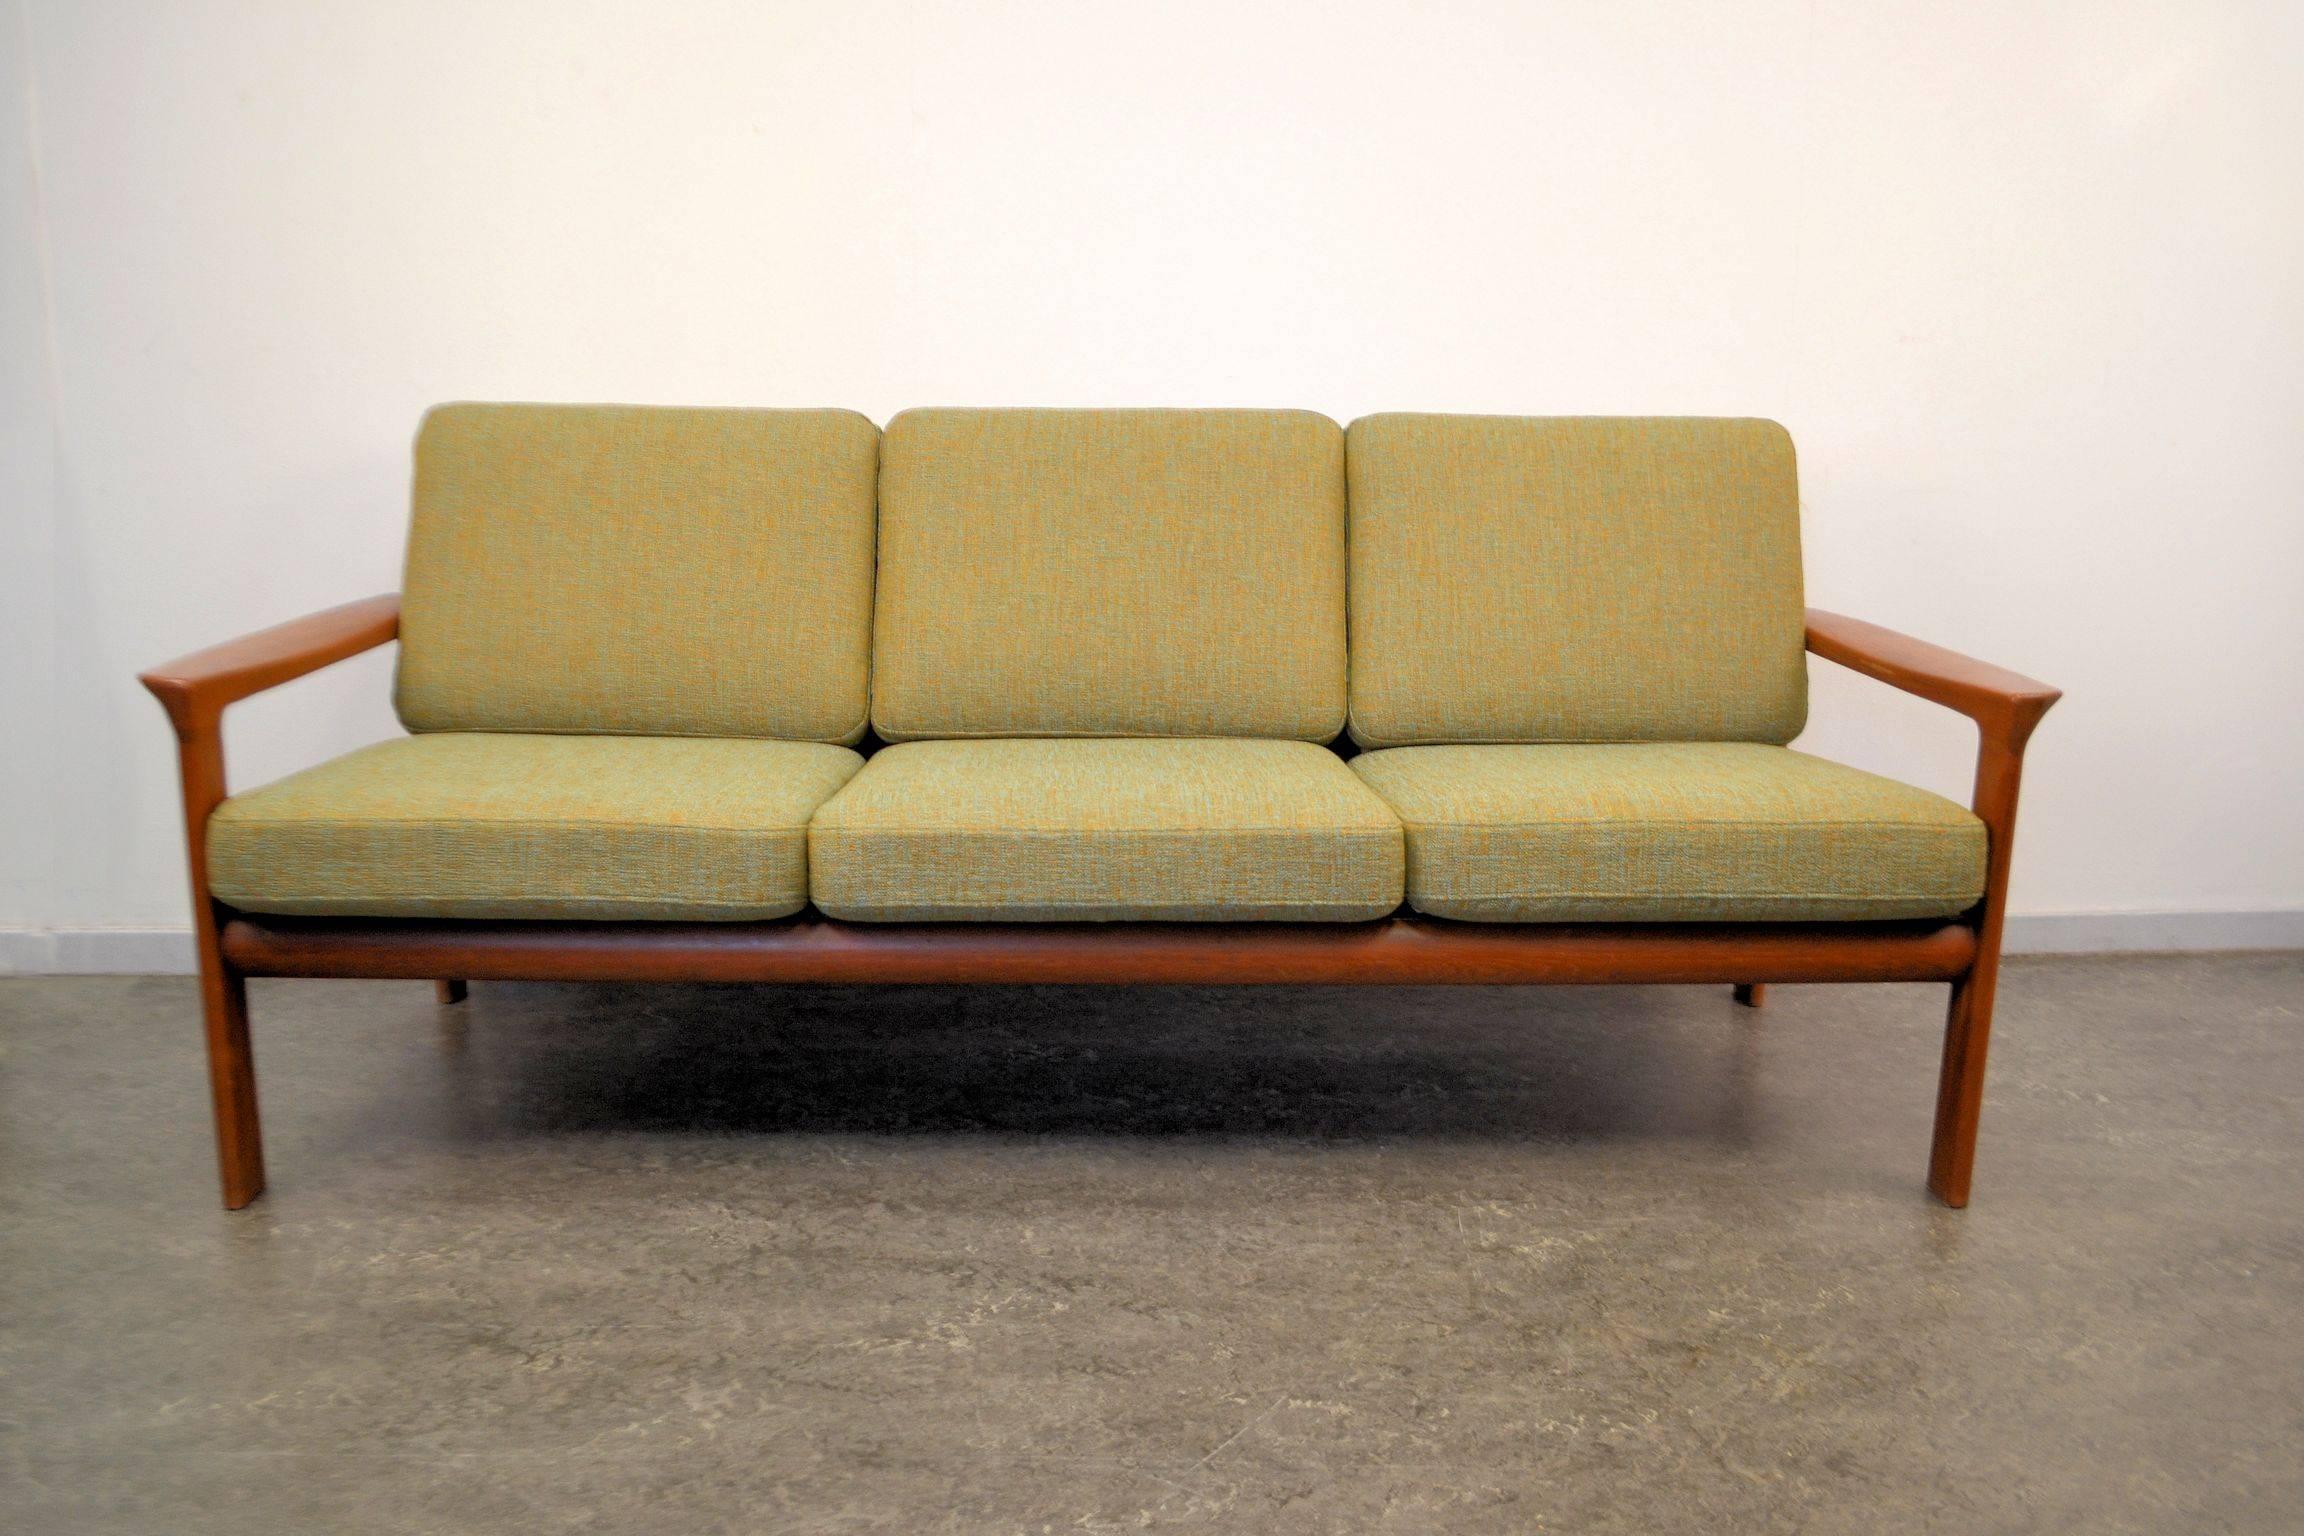 Stylish Danish modern sofa designed in the 1960s by Sven Ellekaer for manufacturer Komfort. Featuring characteristic Danish modern design and quality, a solid teak frame and new easy to remove upholstery. Create a stunning vintage with the available